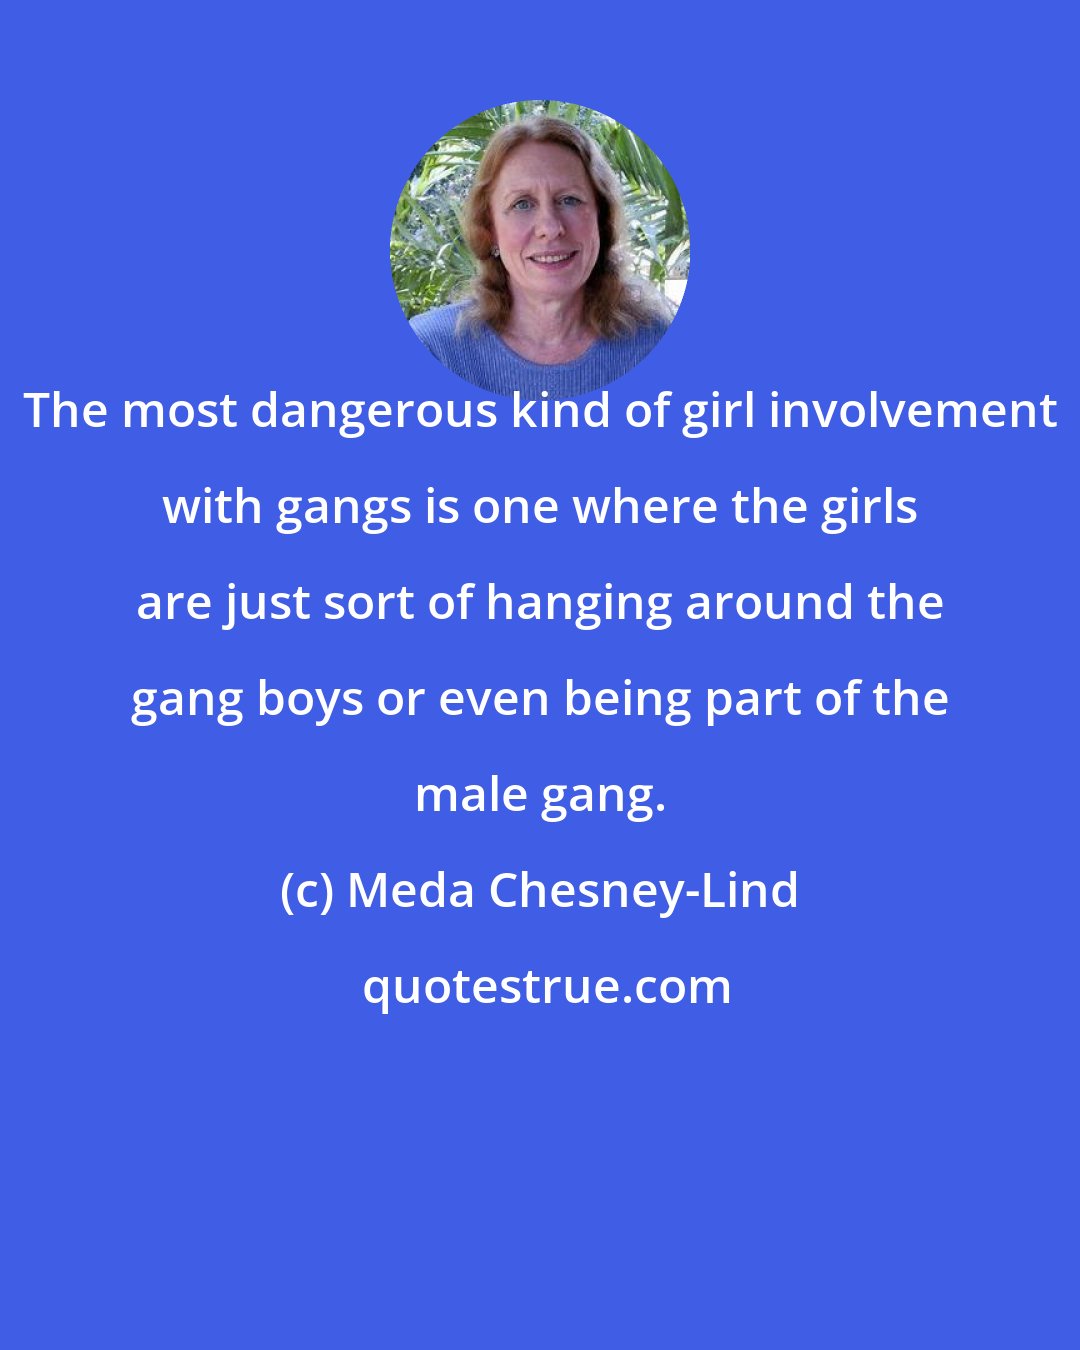 Meda Chesney-Lind: The most dangerous kind of girl involvement with gangs is one where the girls are just sort of hanging around the gang boys or even being part of the male gang.